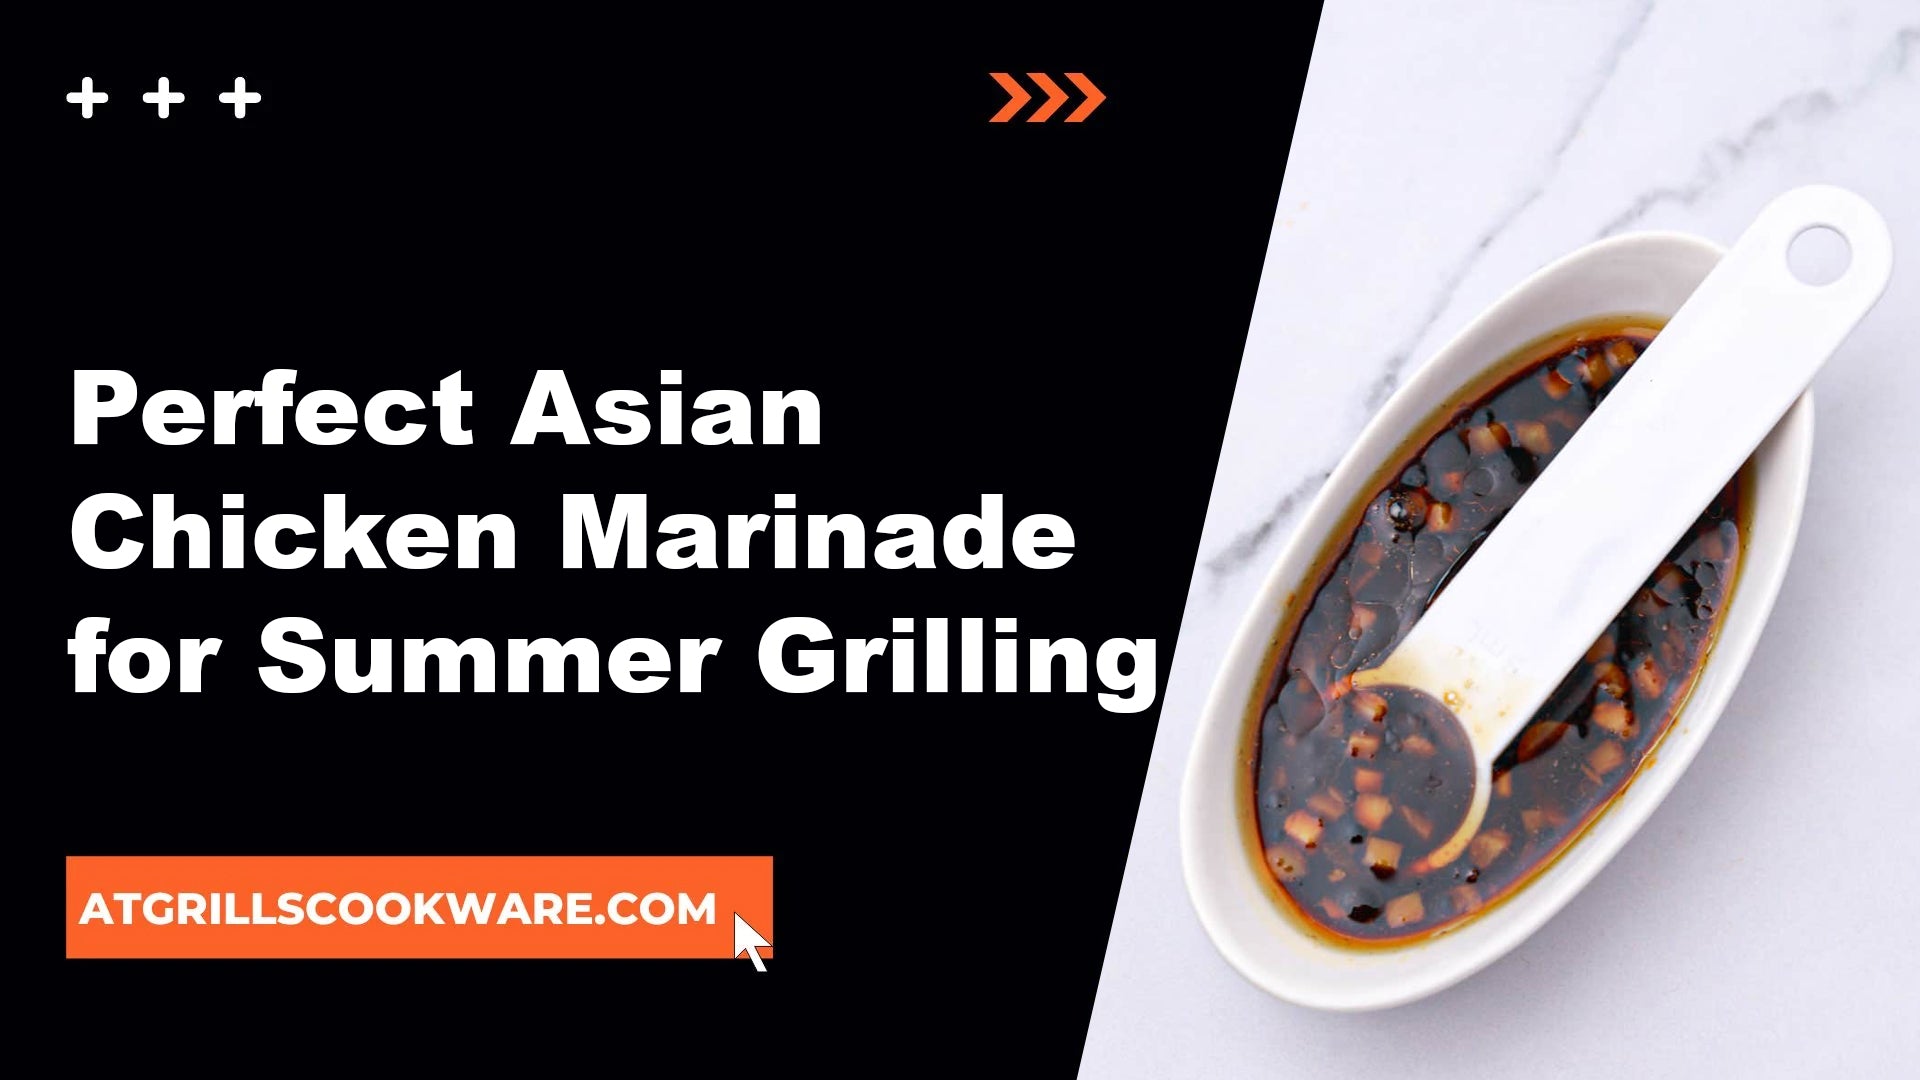 The Ultimate Asian Chicken Marinade for Summer Grilling